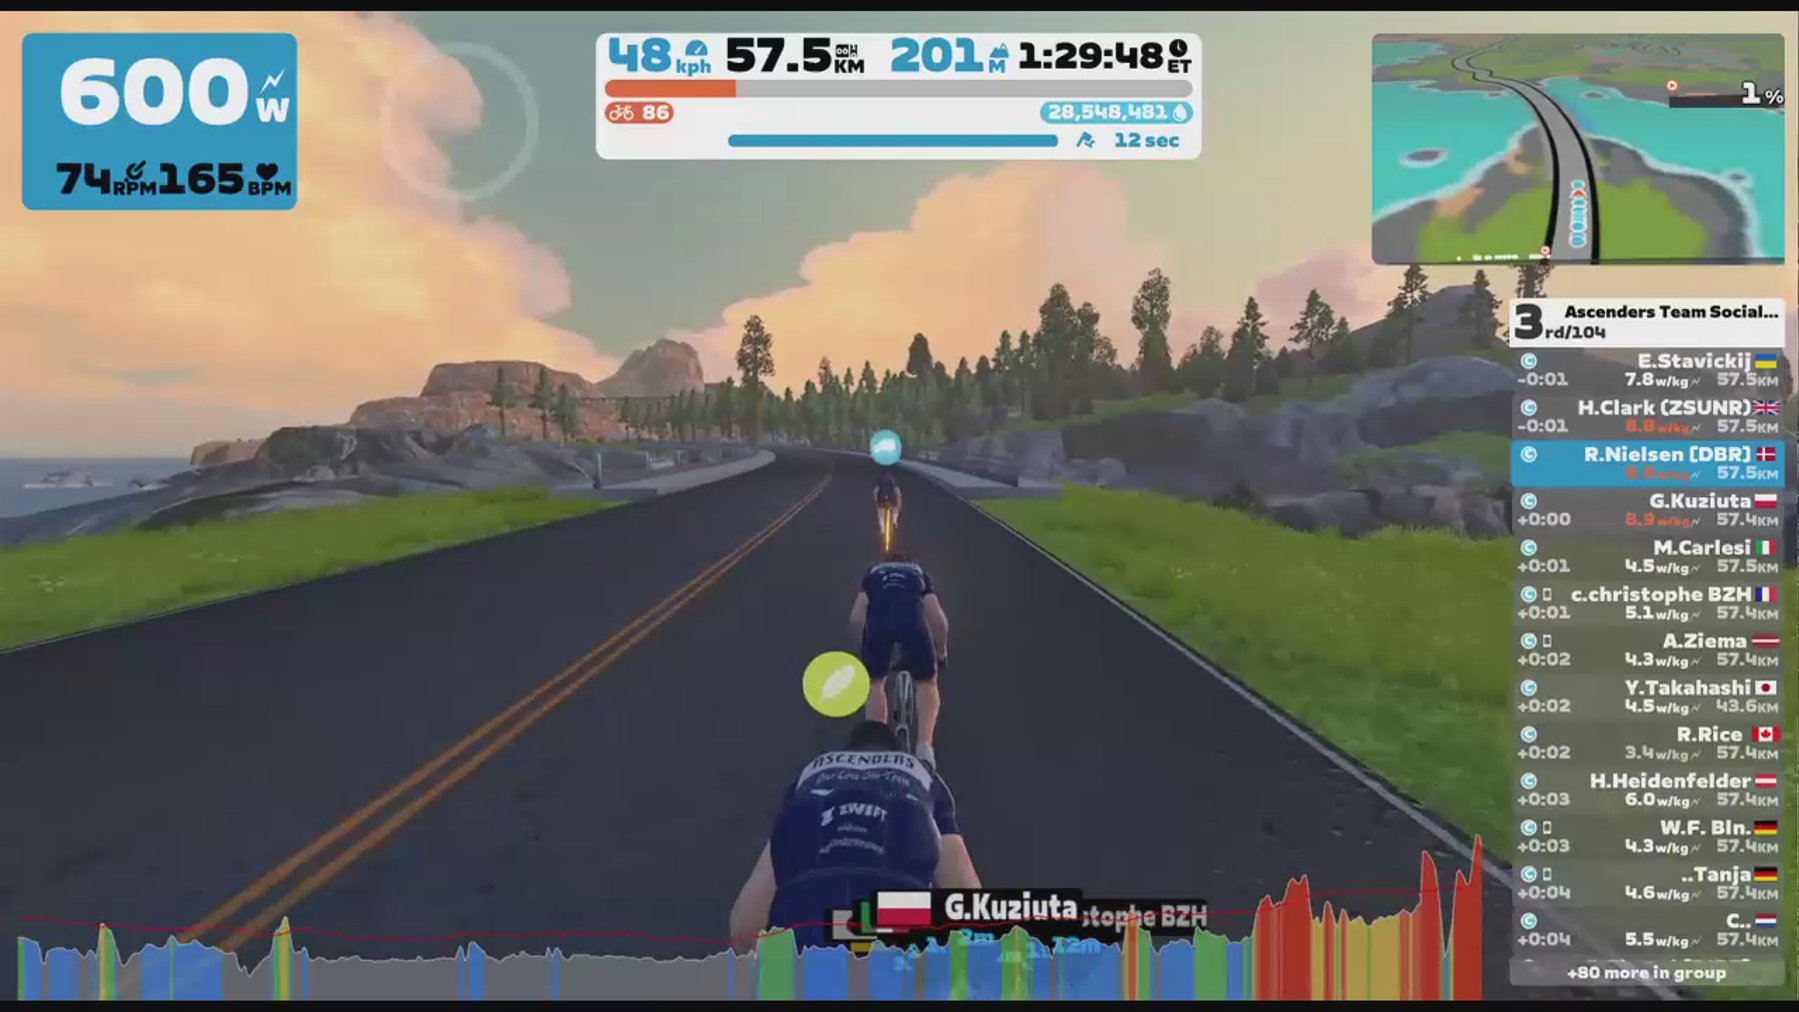 Zwift - Group Ride: Ascenders Team Social Thursday Rides (C) on Big Flat 8 in Watopia